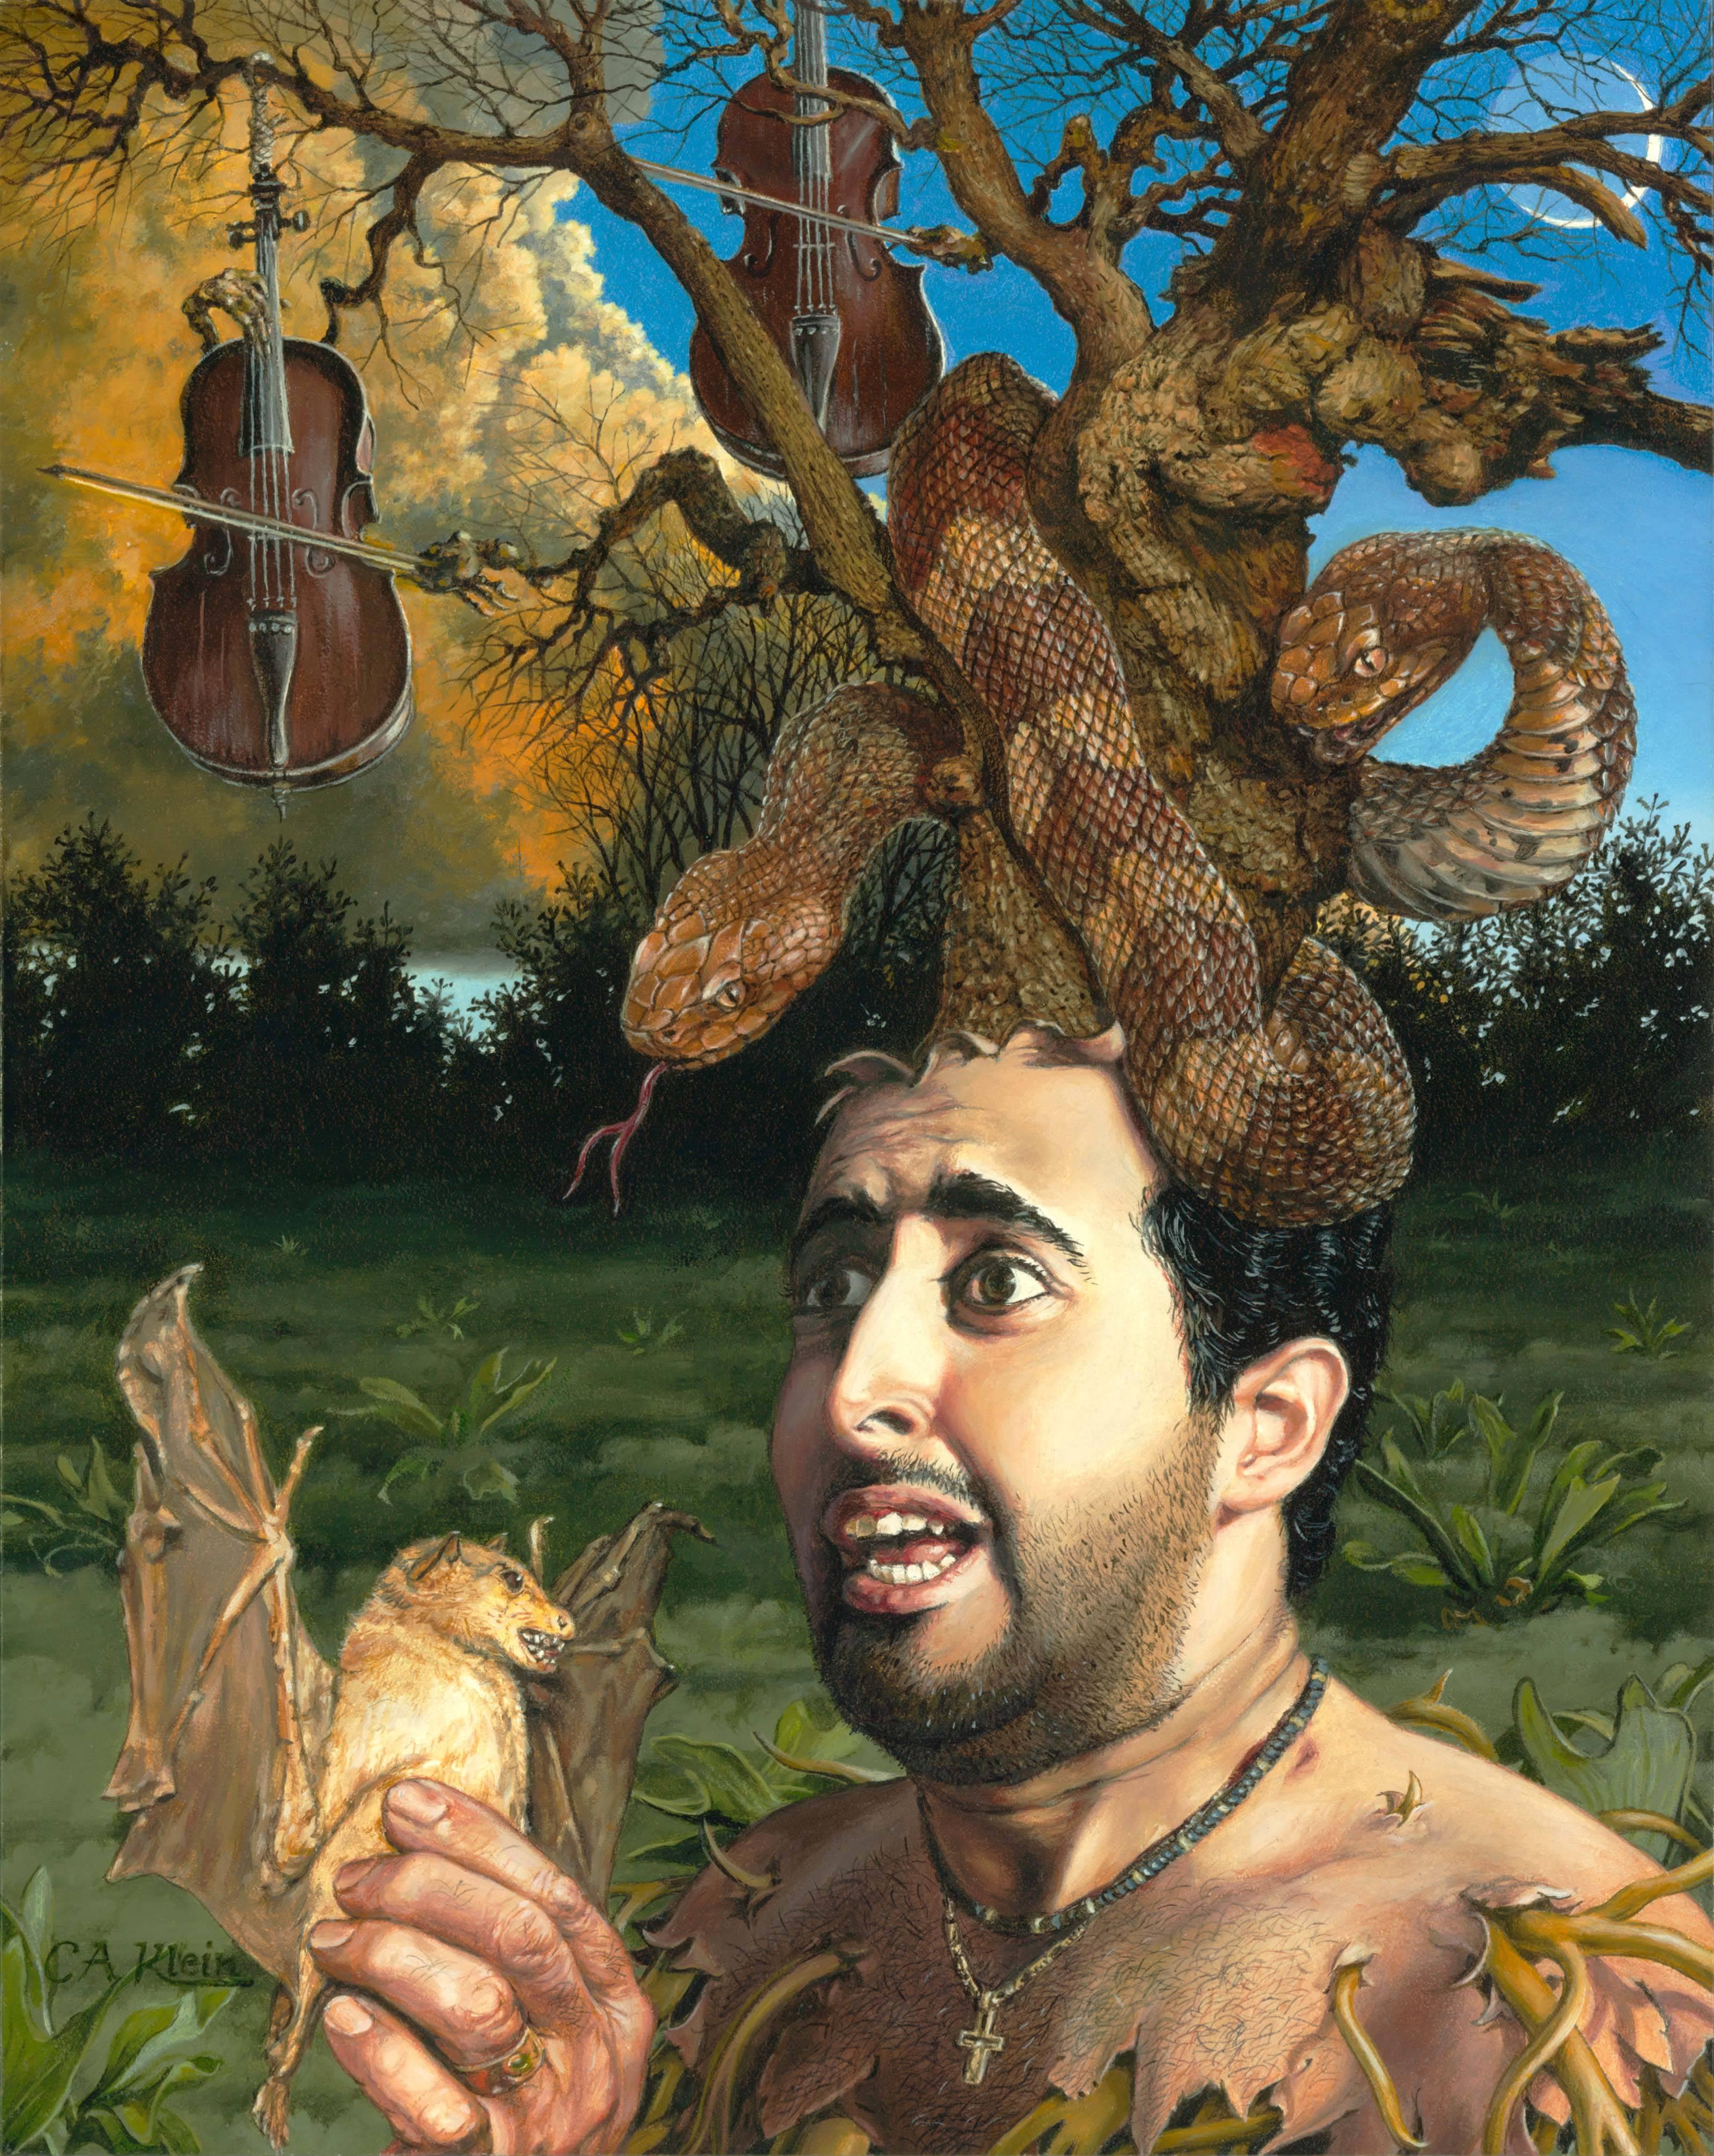 The Duet -Original Oil Surreal Painting of Man with Tree Growing Out of His Head